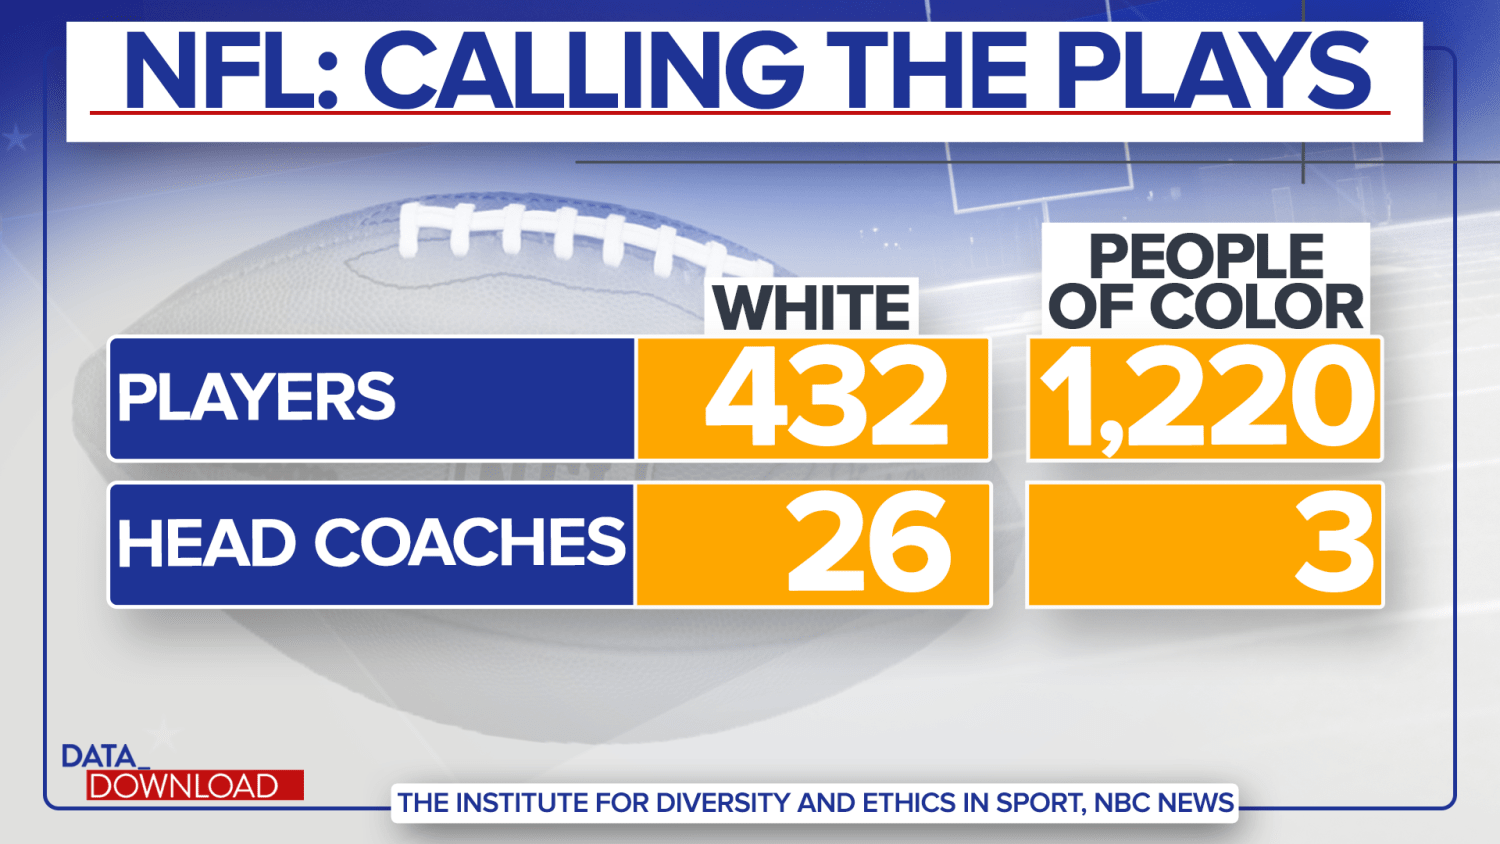 racial equality problem is among coaches pic